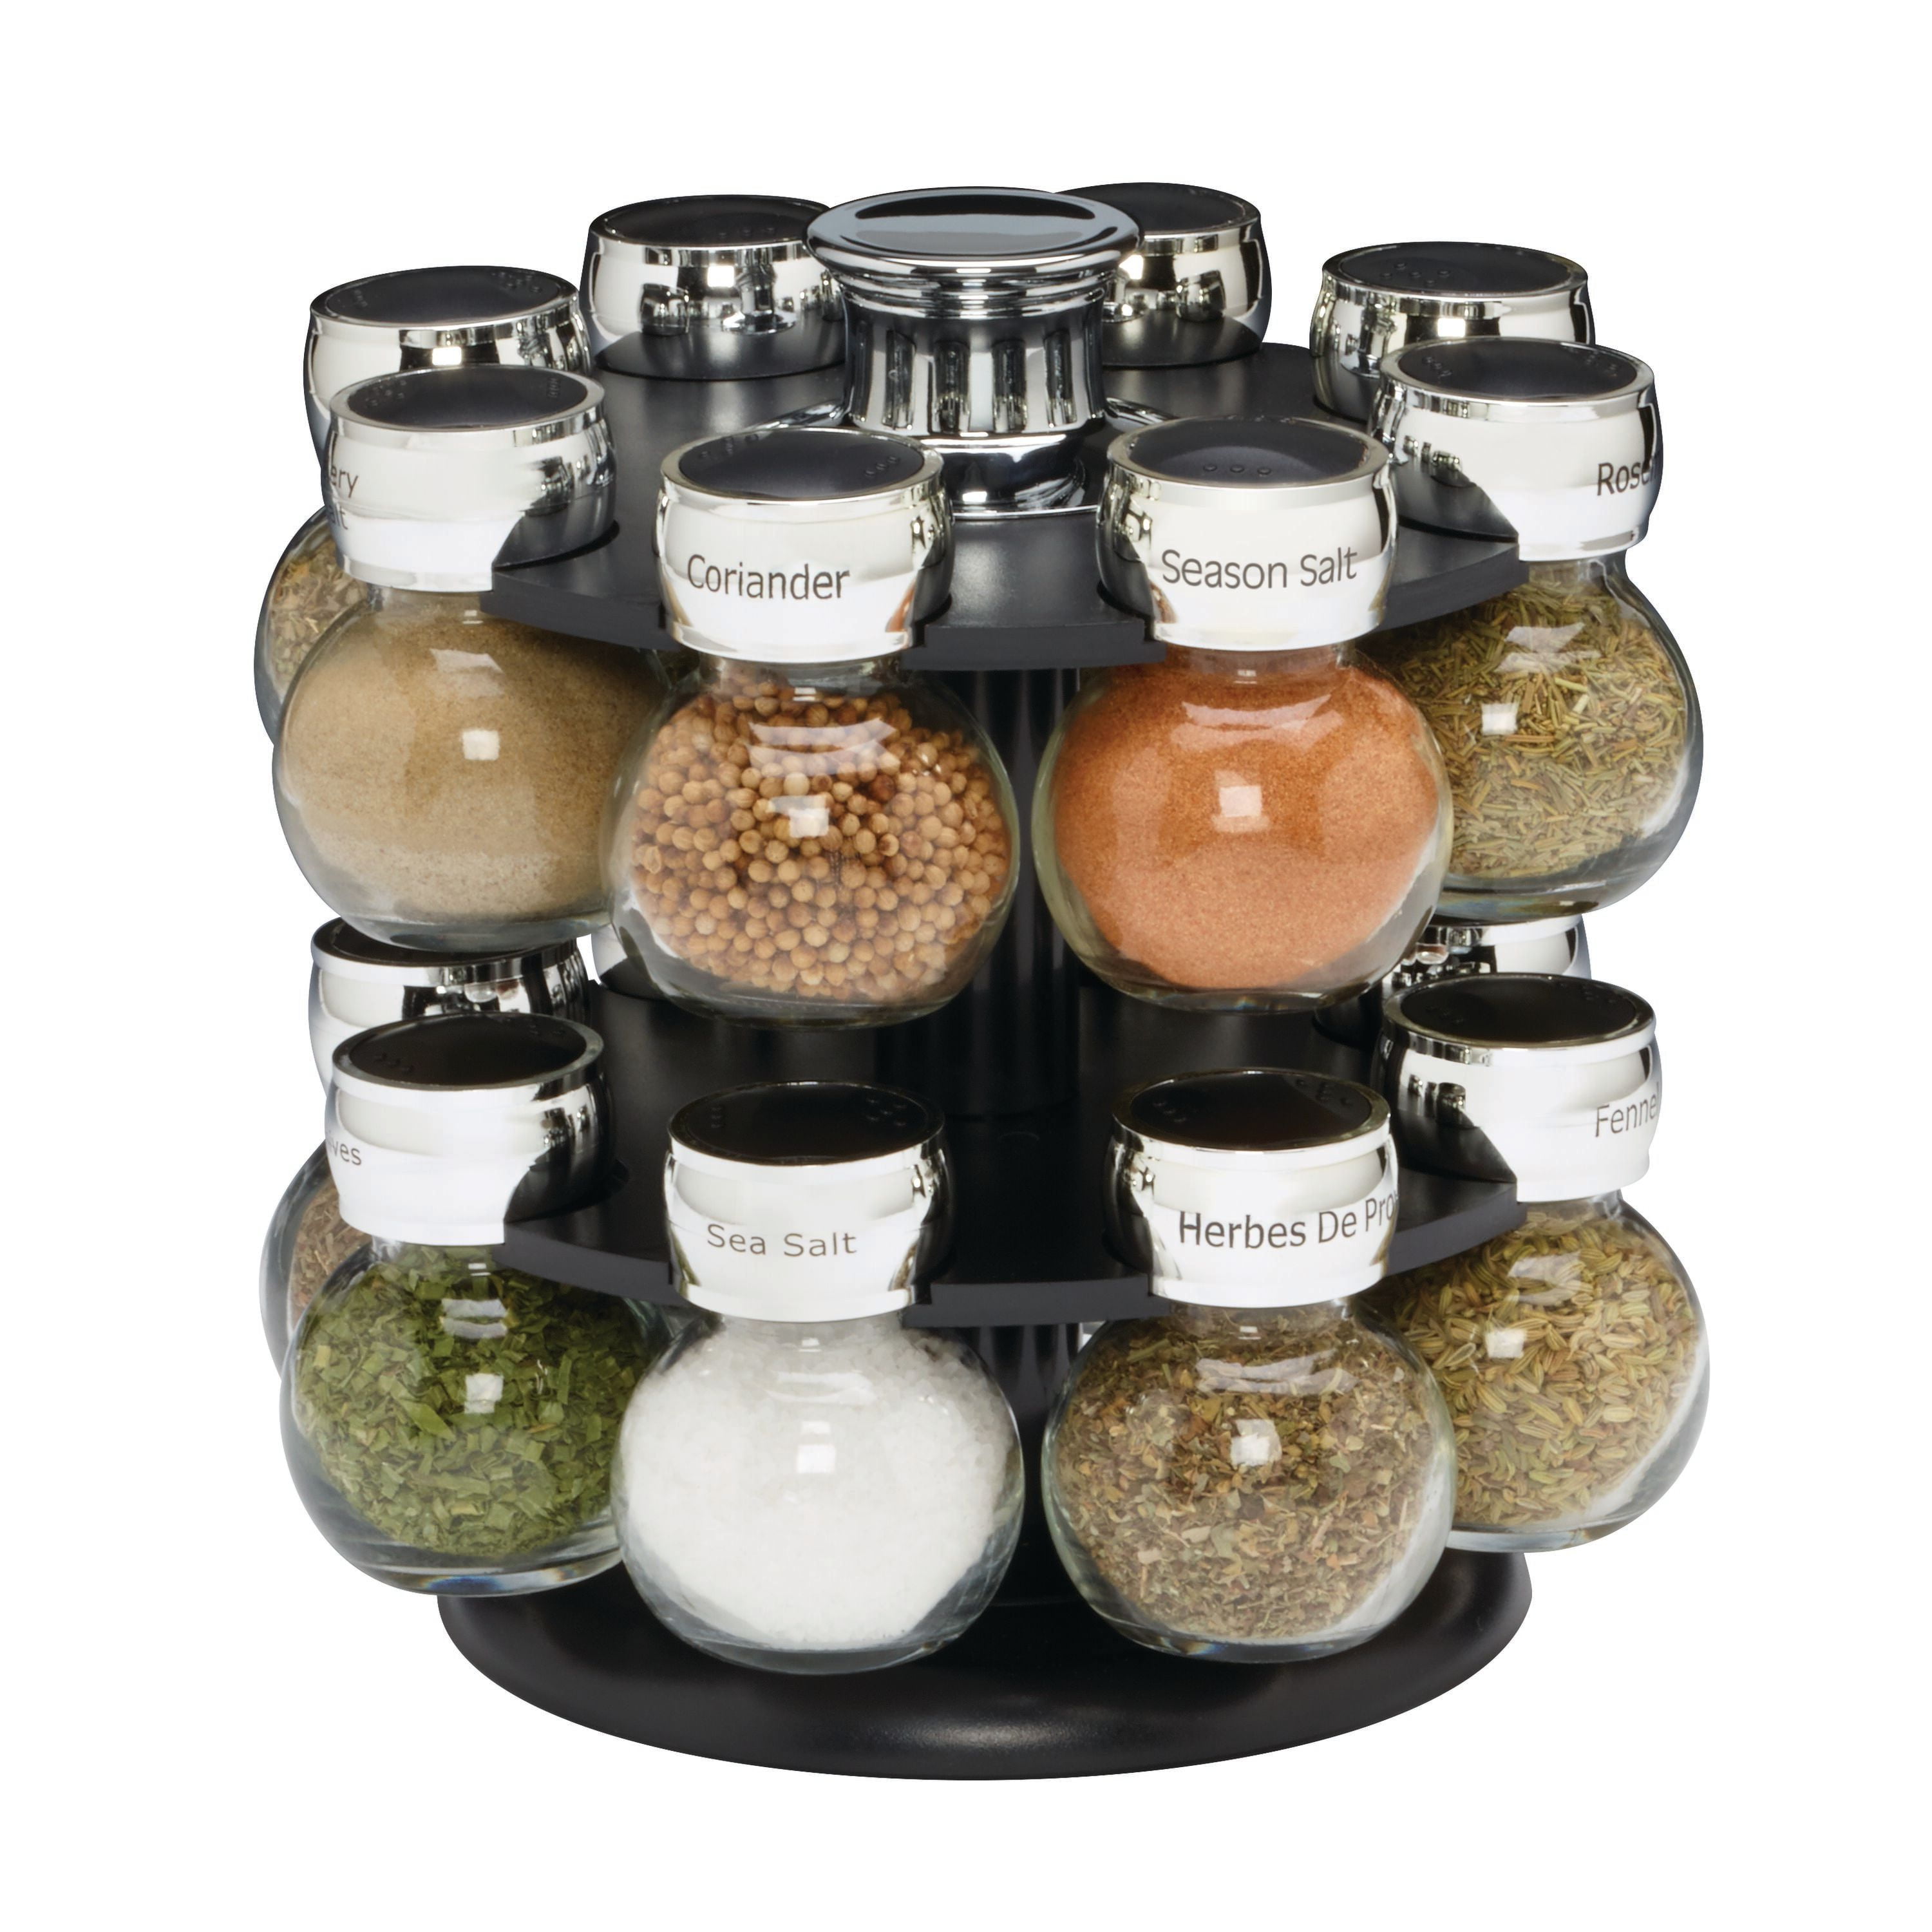 Kamenstein 16 Jar Ellington Revolving Countertop Spice Rack with Lift &  Pour Caps and Spices Included, FREE Spice Refills for 5 Years: Black and